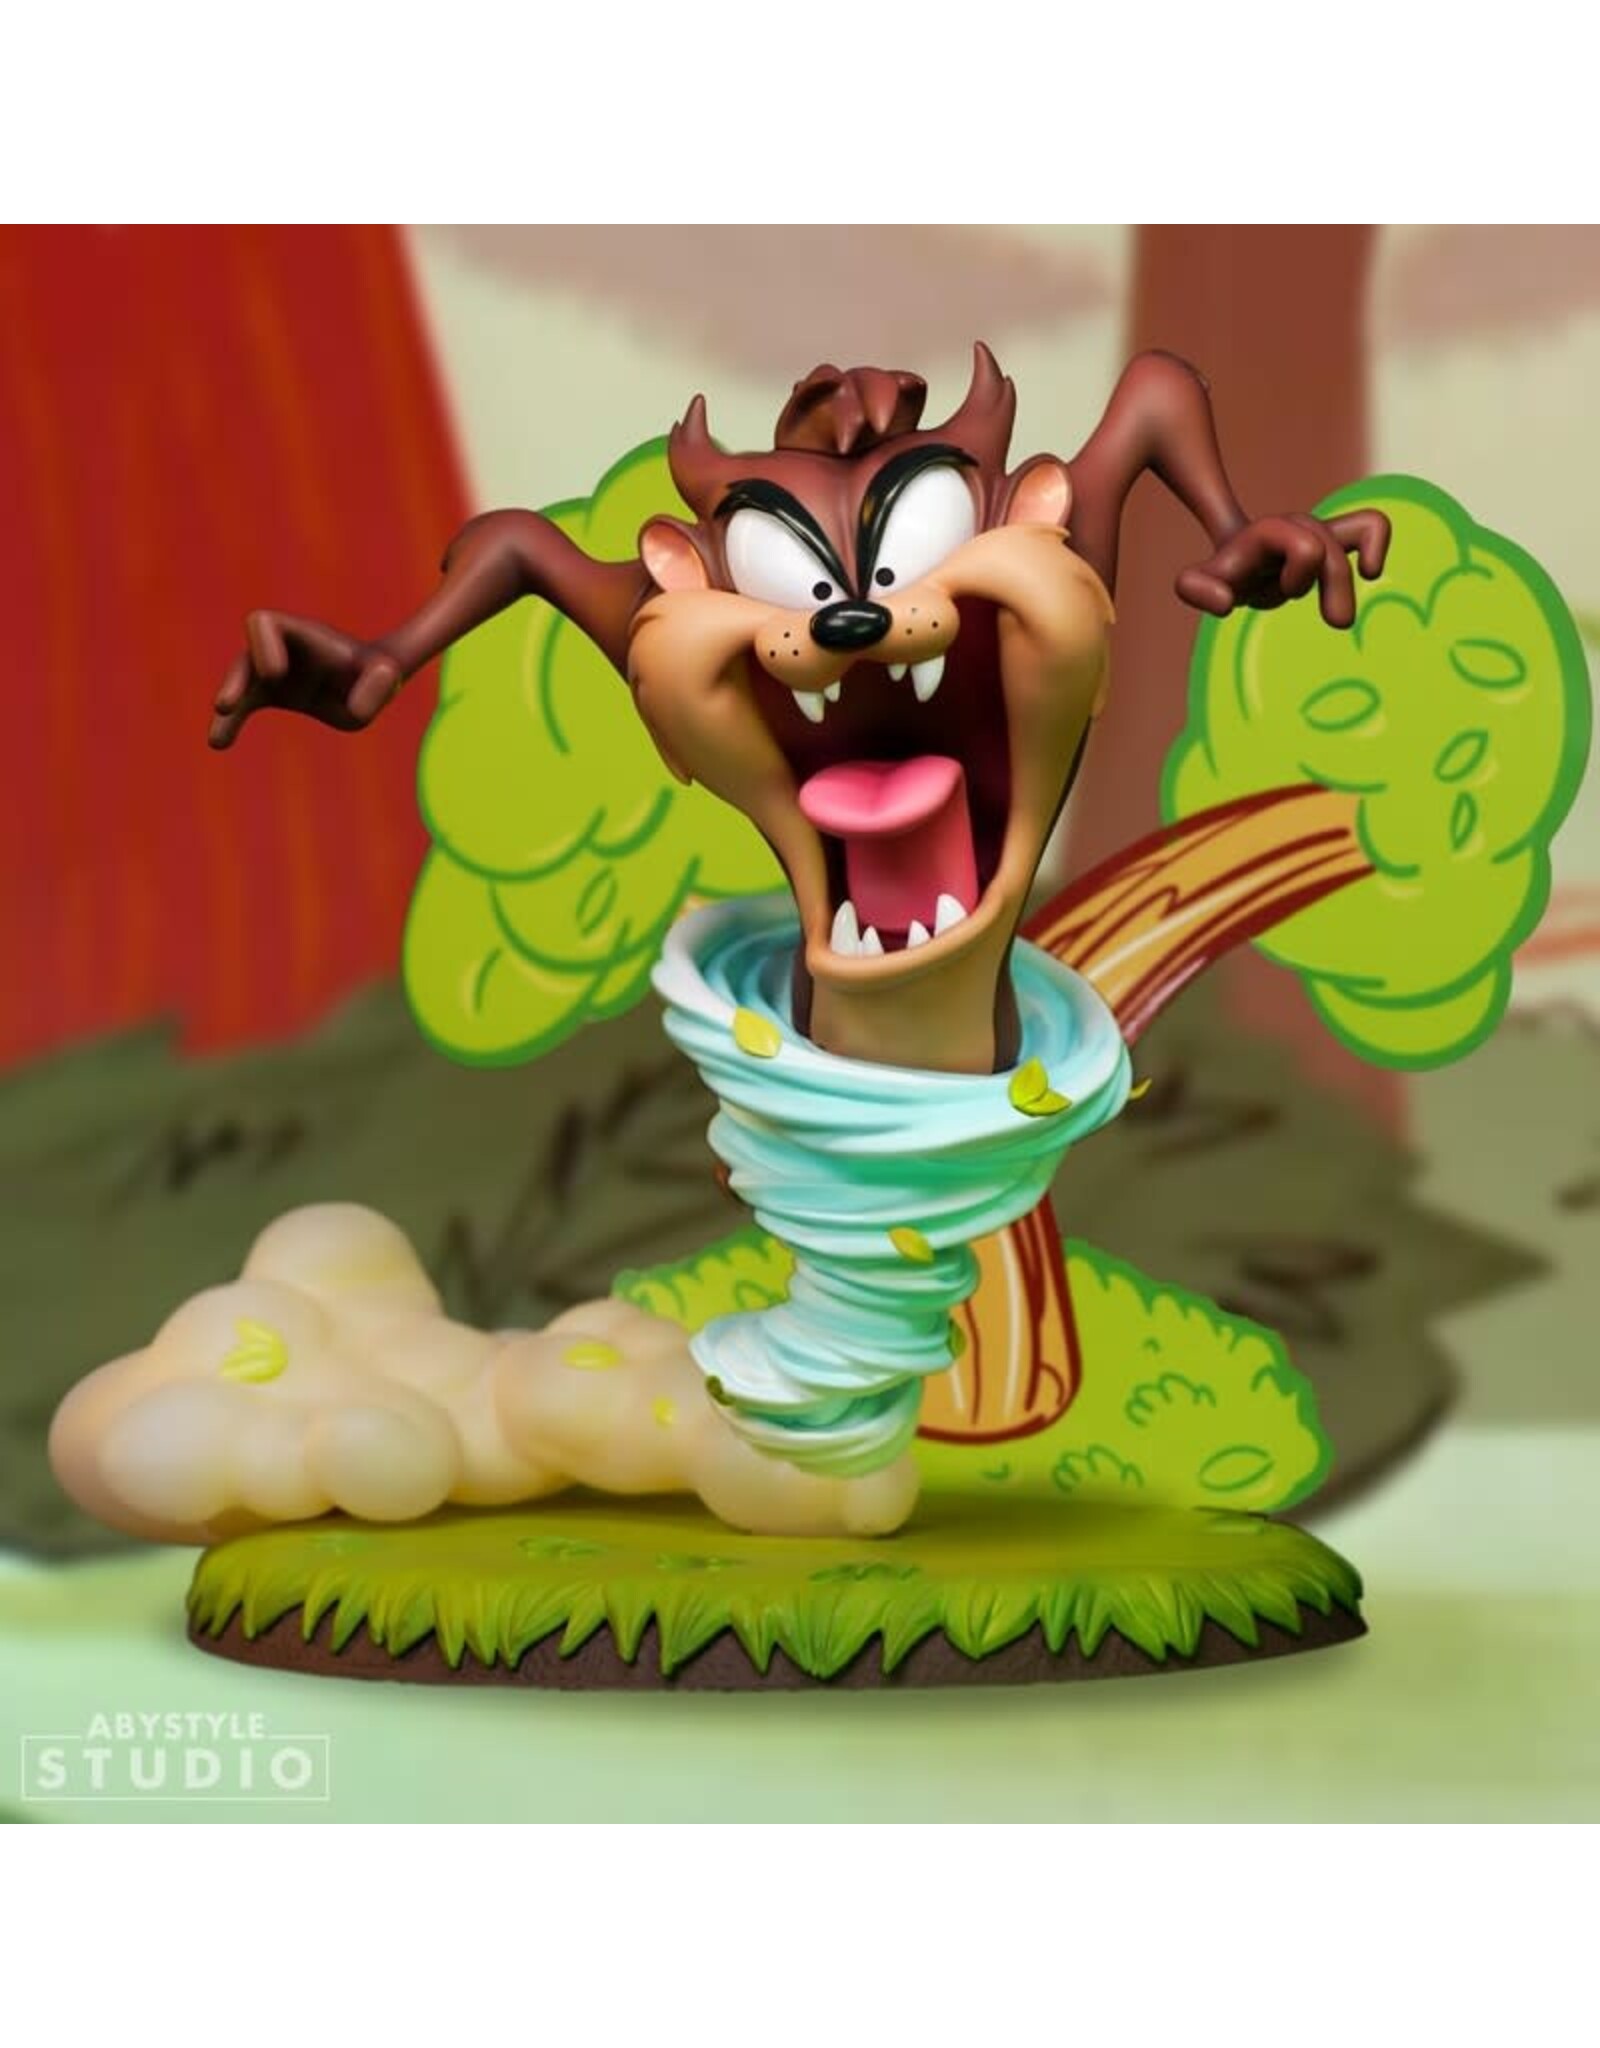 ABYSTYLE SG Figures:  Looney Tunes - Taz Figurine